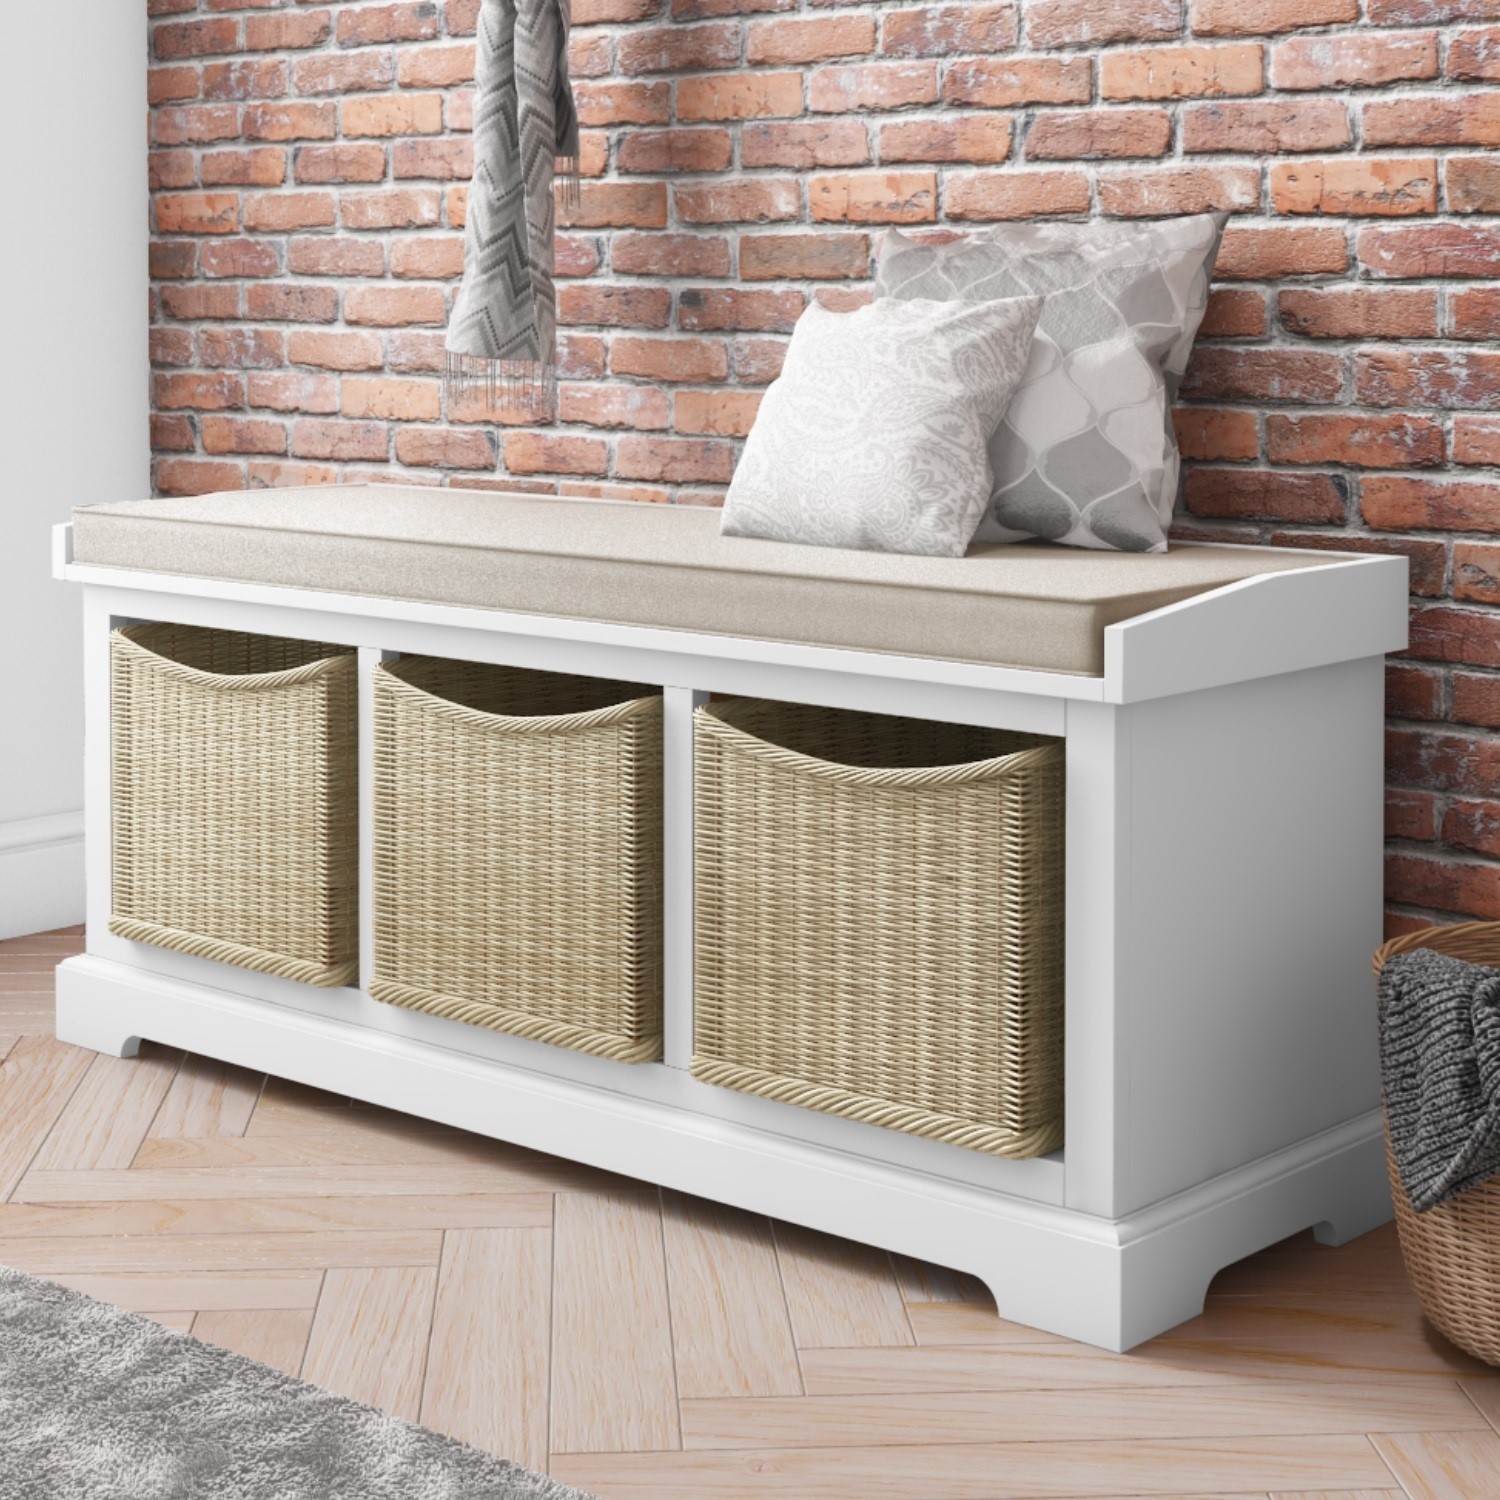 White Shoe Rack with Seat Storage Bench 